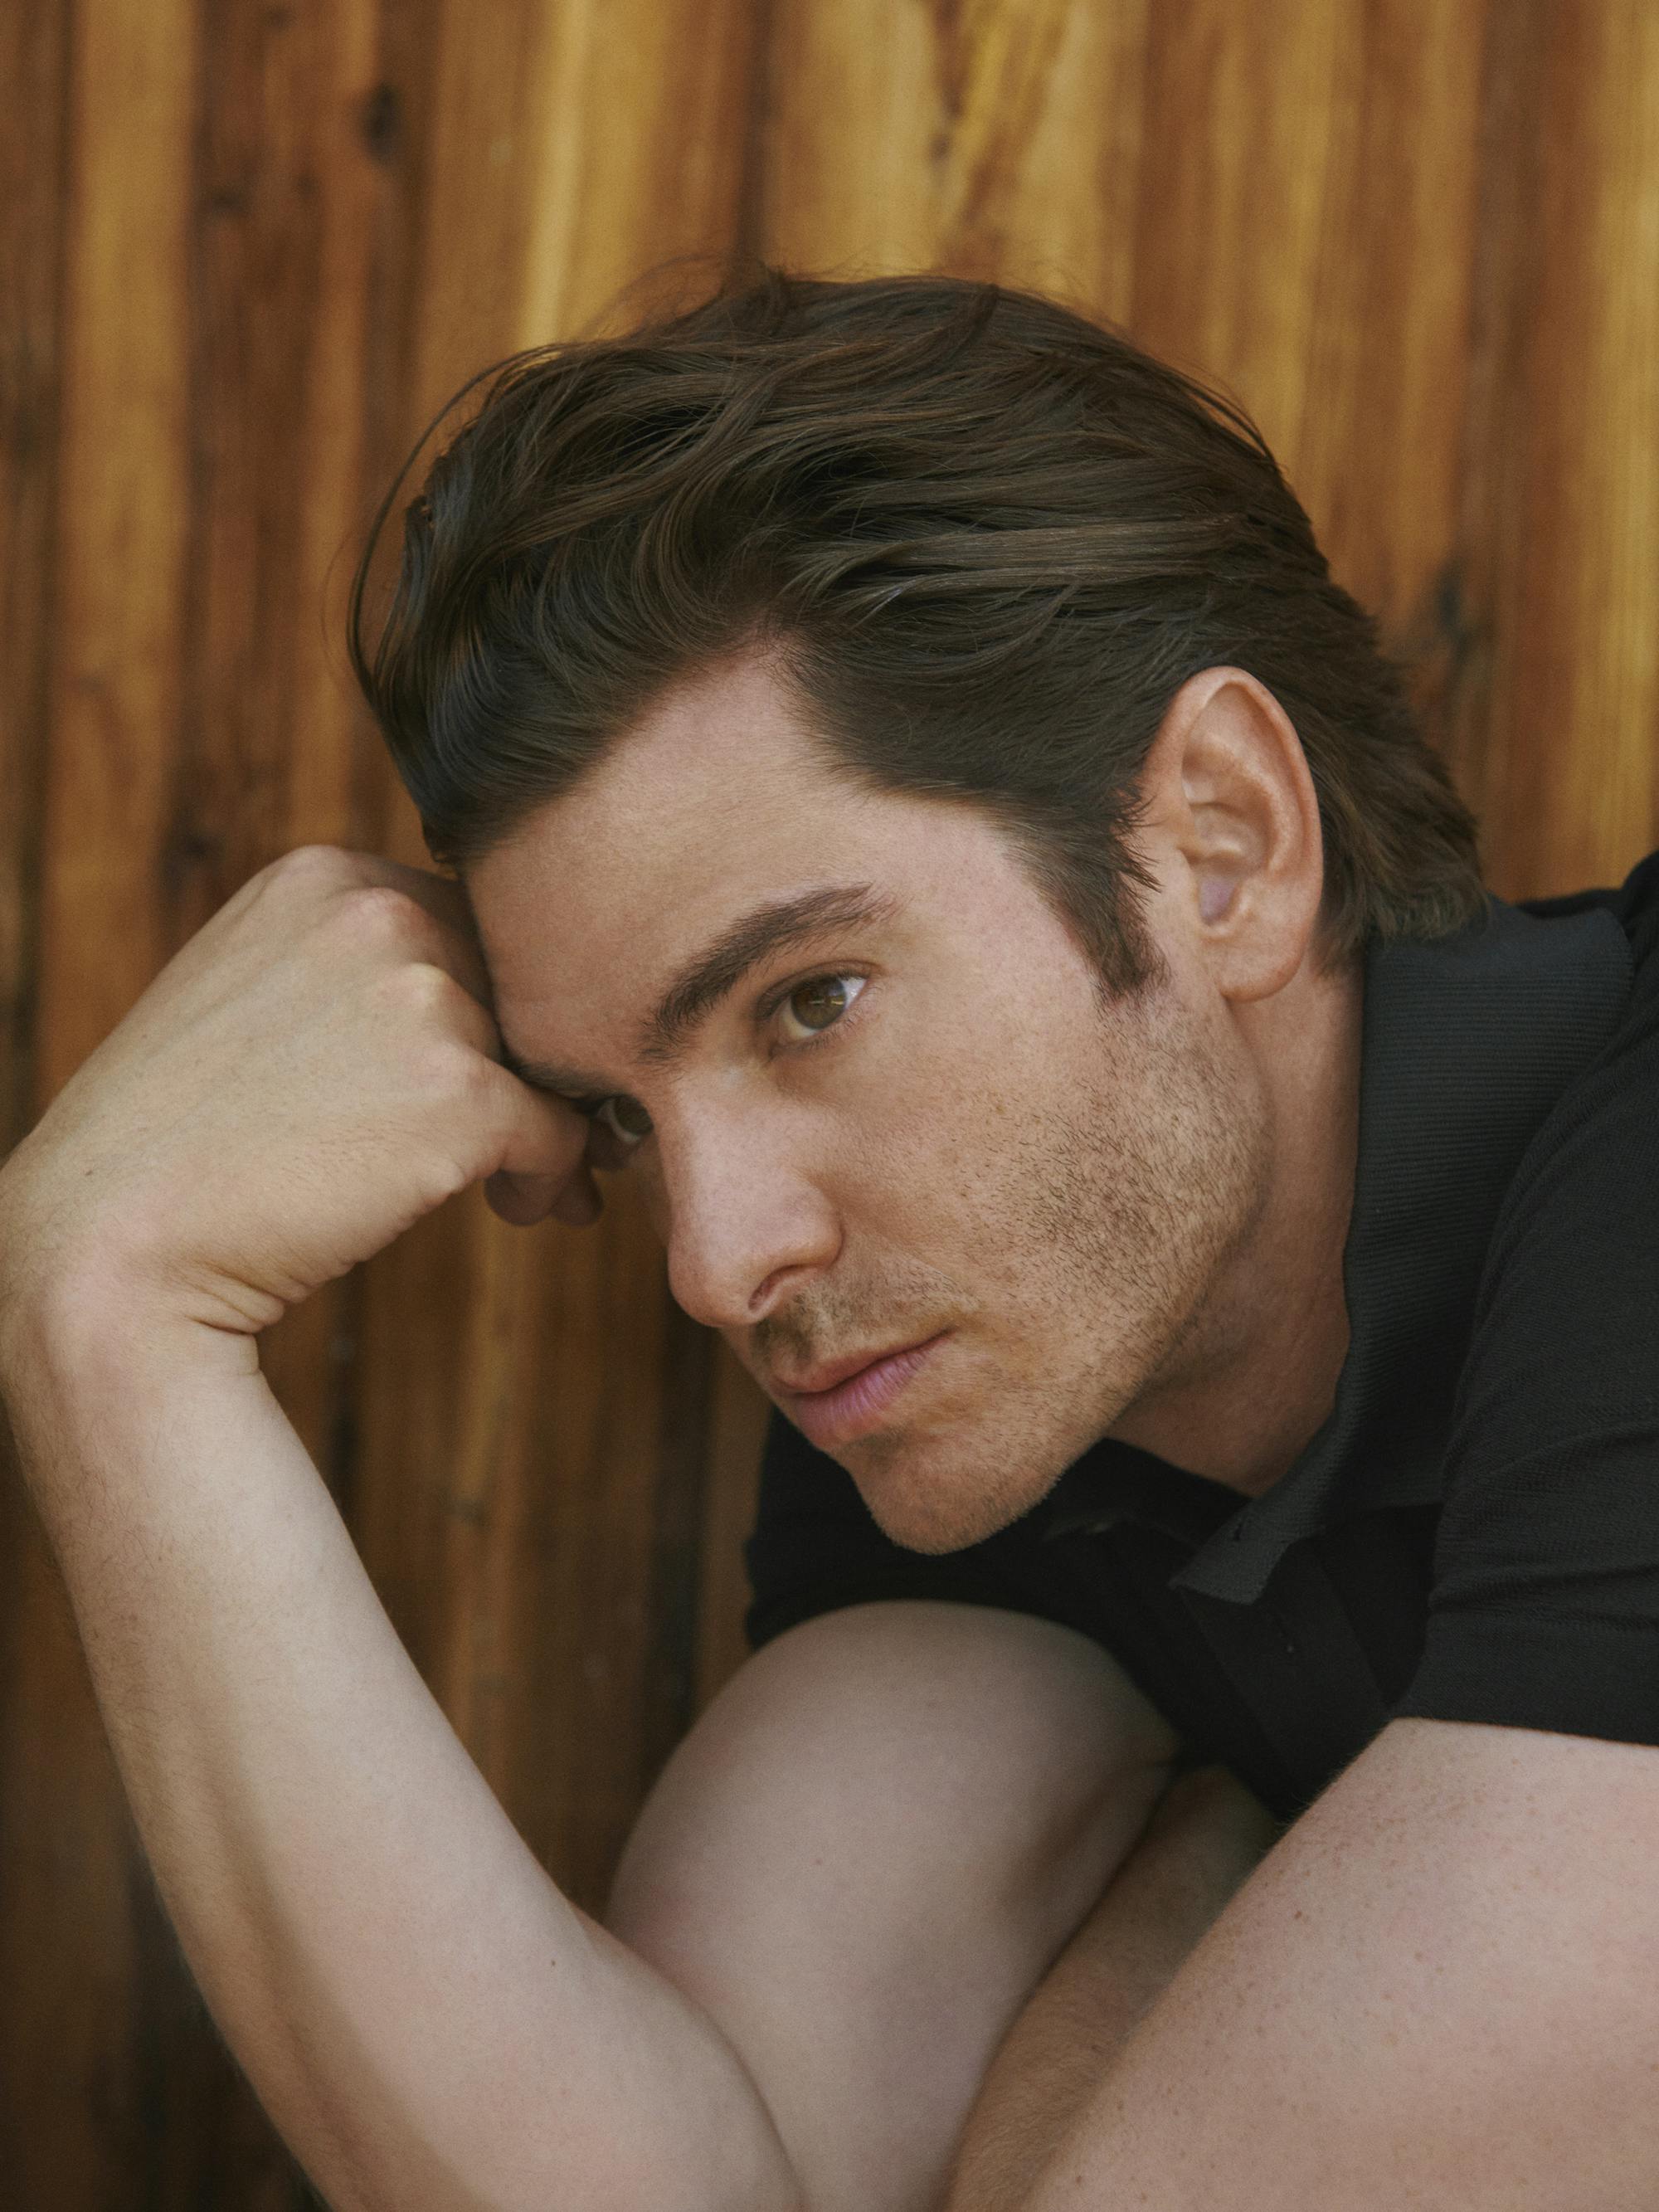 Andrew Garfield wears a black t-shirt and rests against a wooden wall.